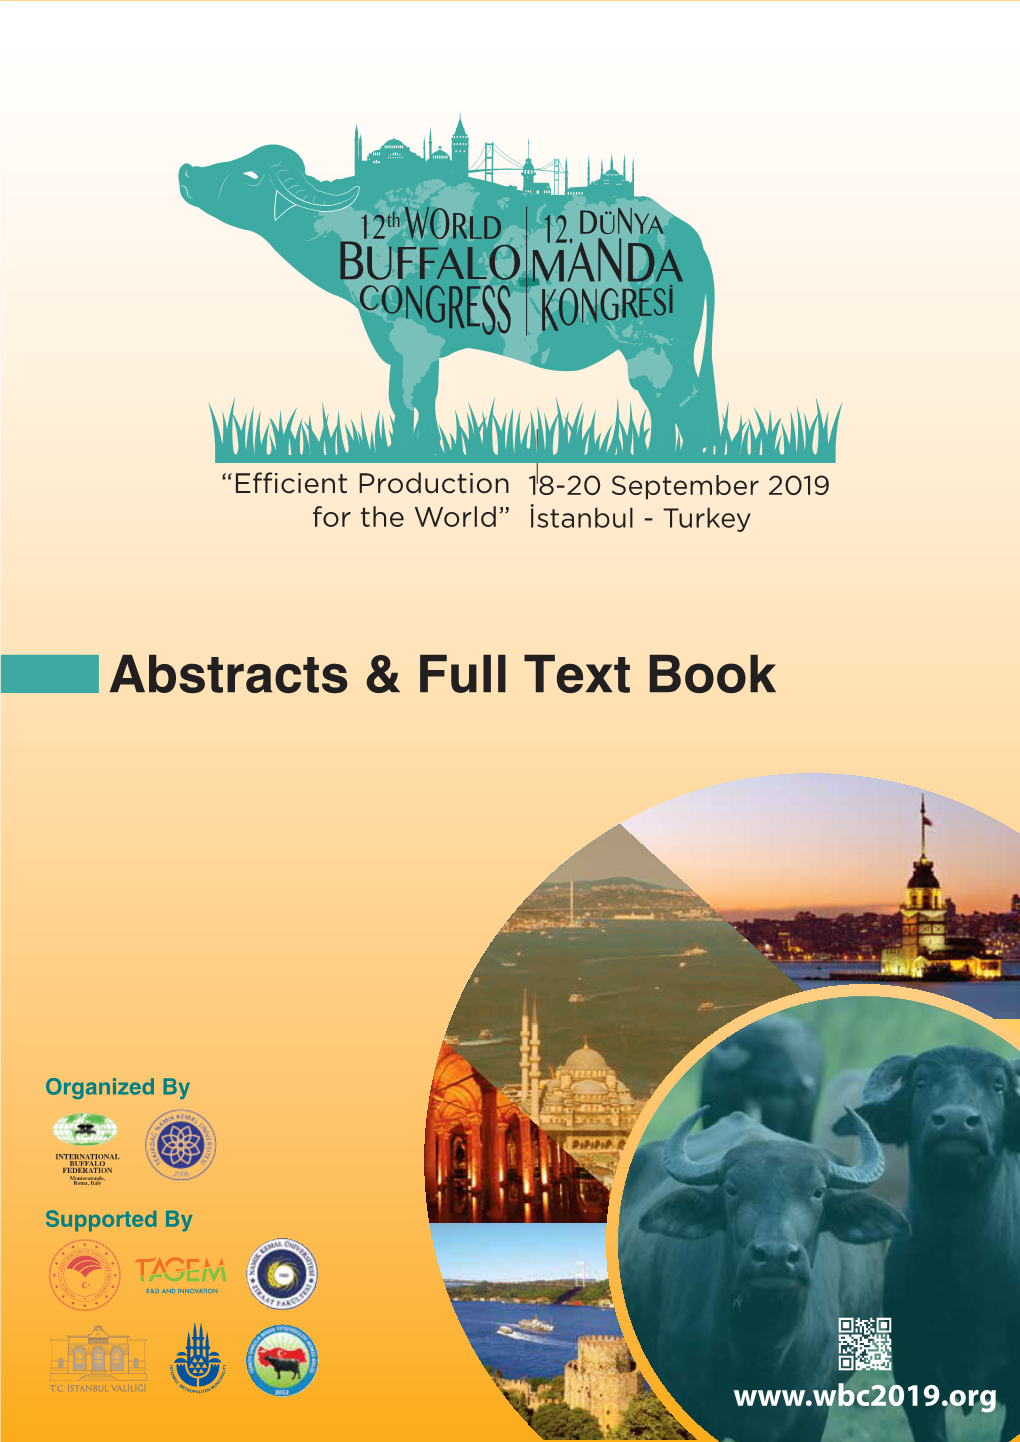 Abstracts & Full Text Book